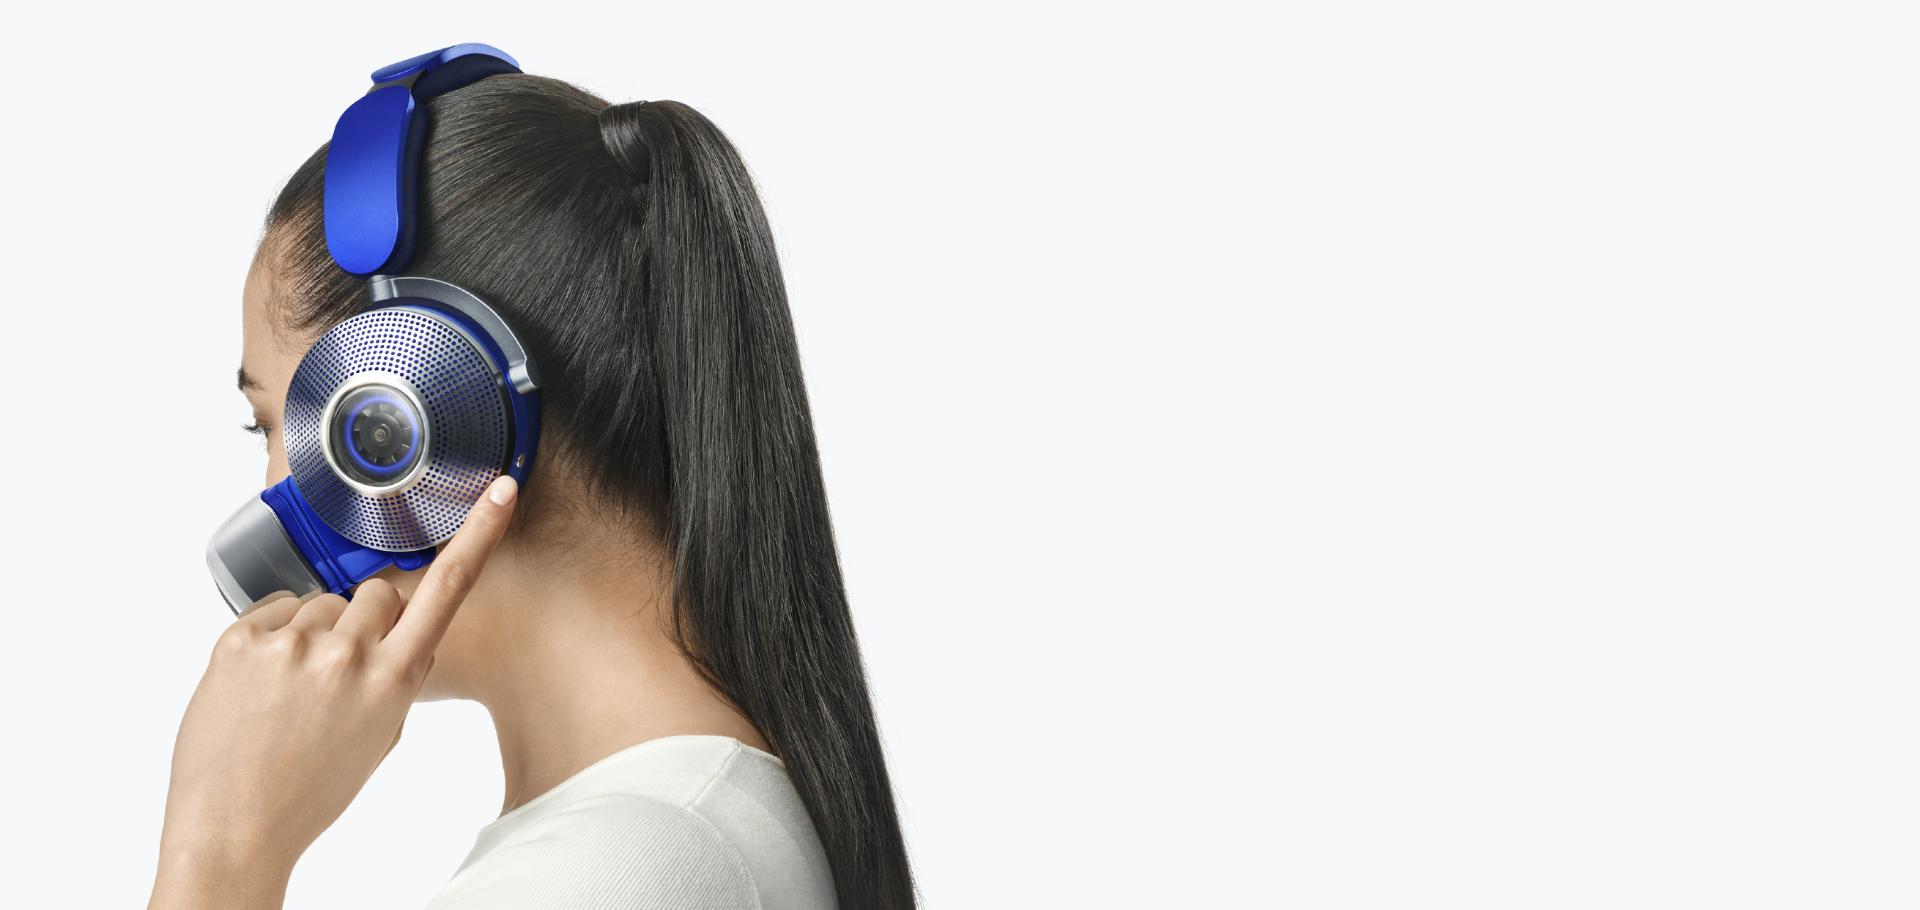 Woman taps the side of the ear cup to change modes on the Dyson Zone air-purifying headphones.